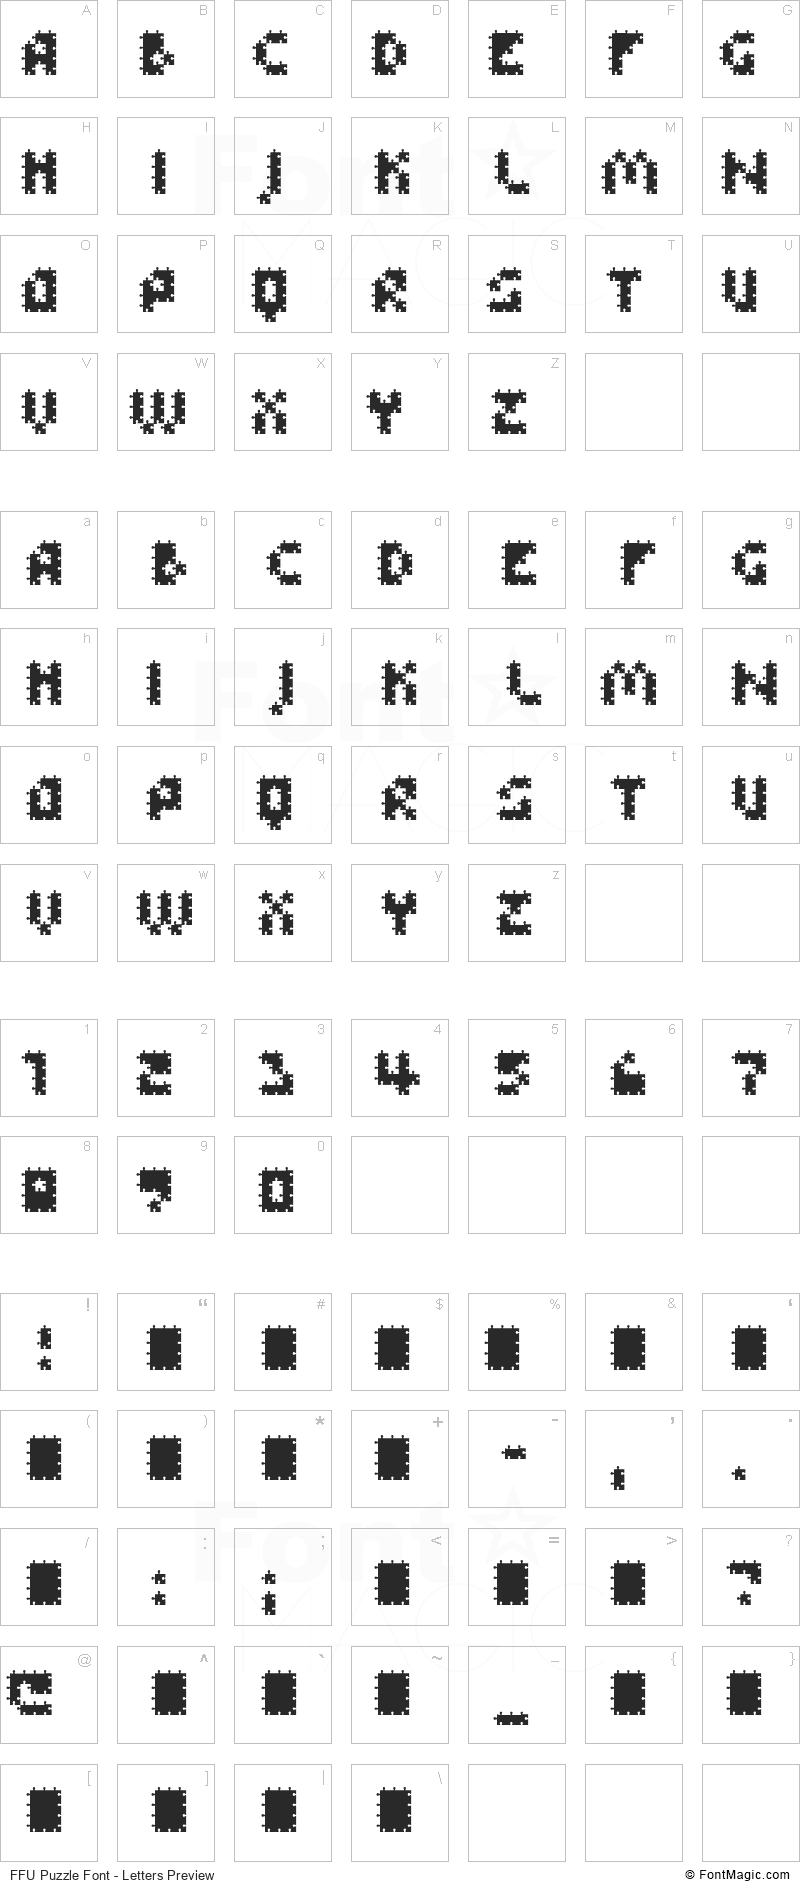 FFU Puzzle Font - All Latters Preview Chart